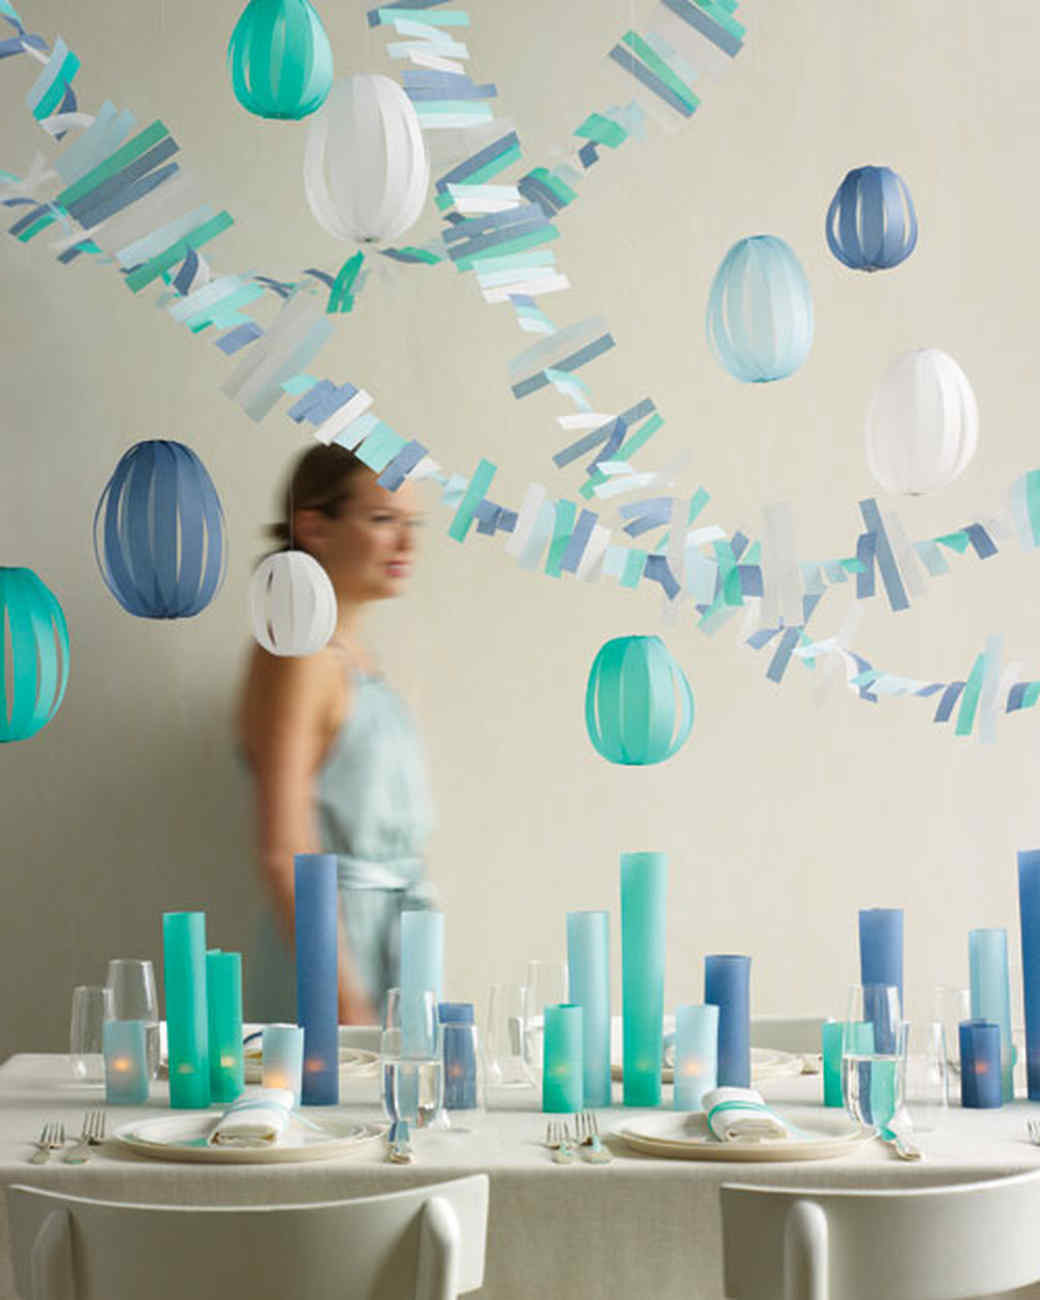 Baby Shower Wall Decoration Ideas
 Our Best Baby Shower Decorations